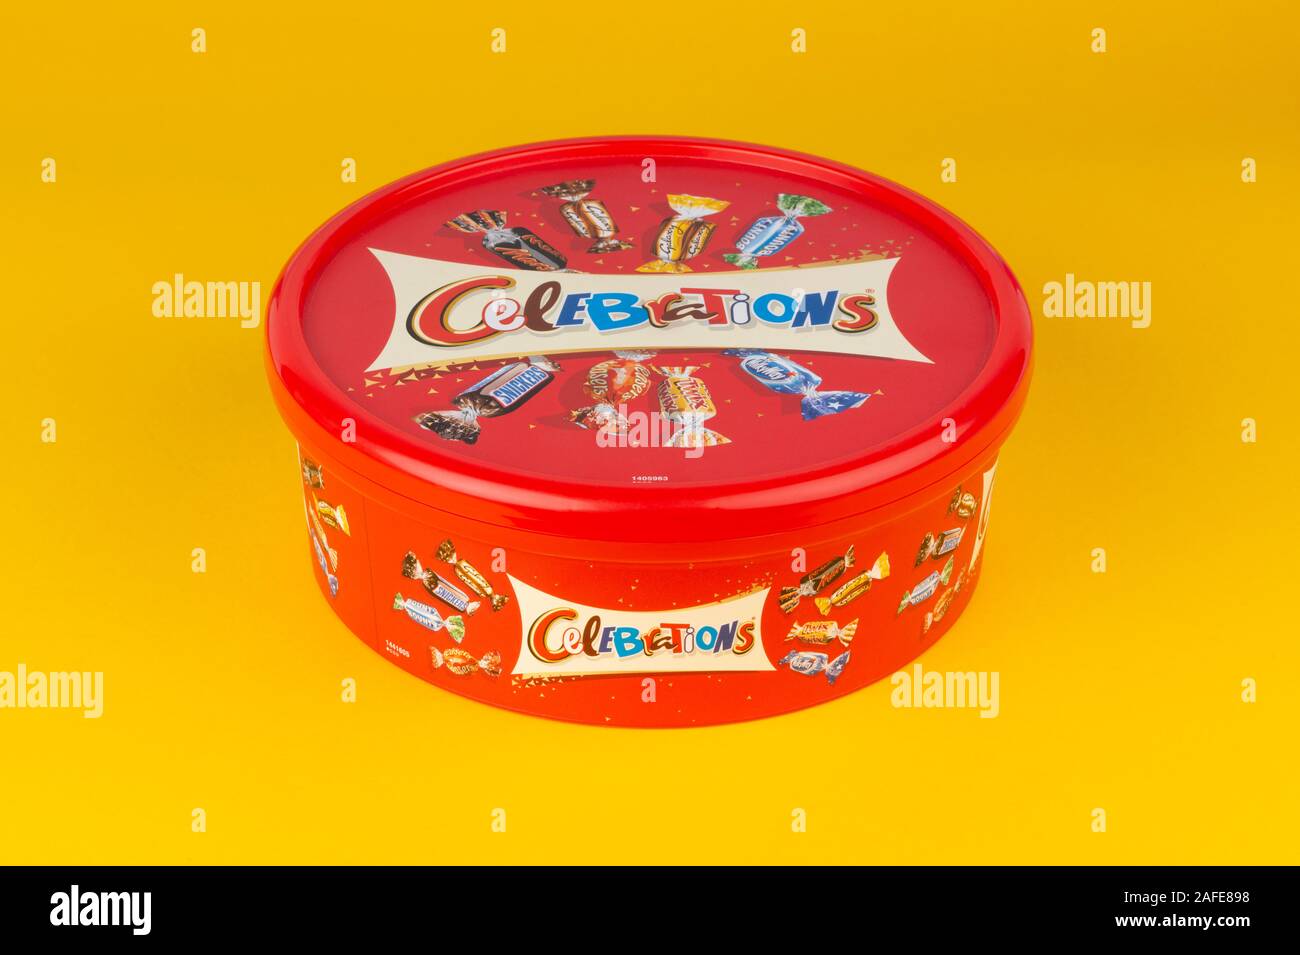 A box of Celebrations chocolate confectionery shot on a yellow background. Stock Photo